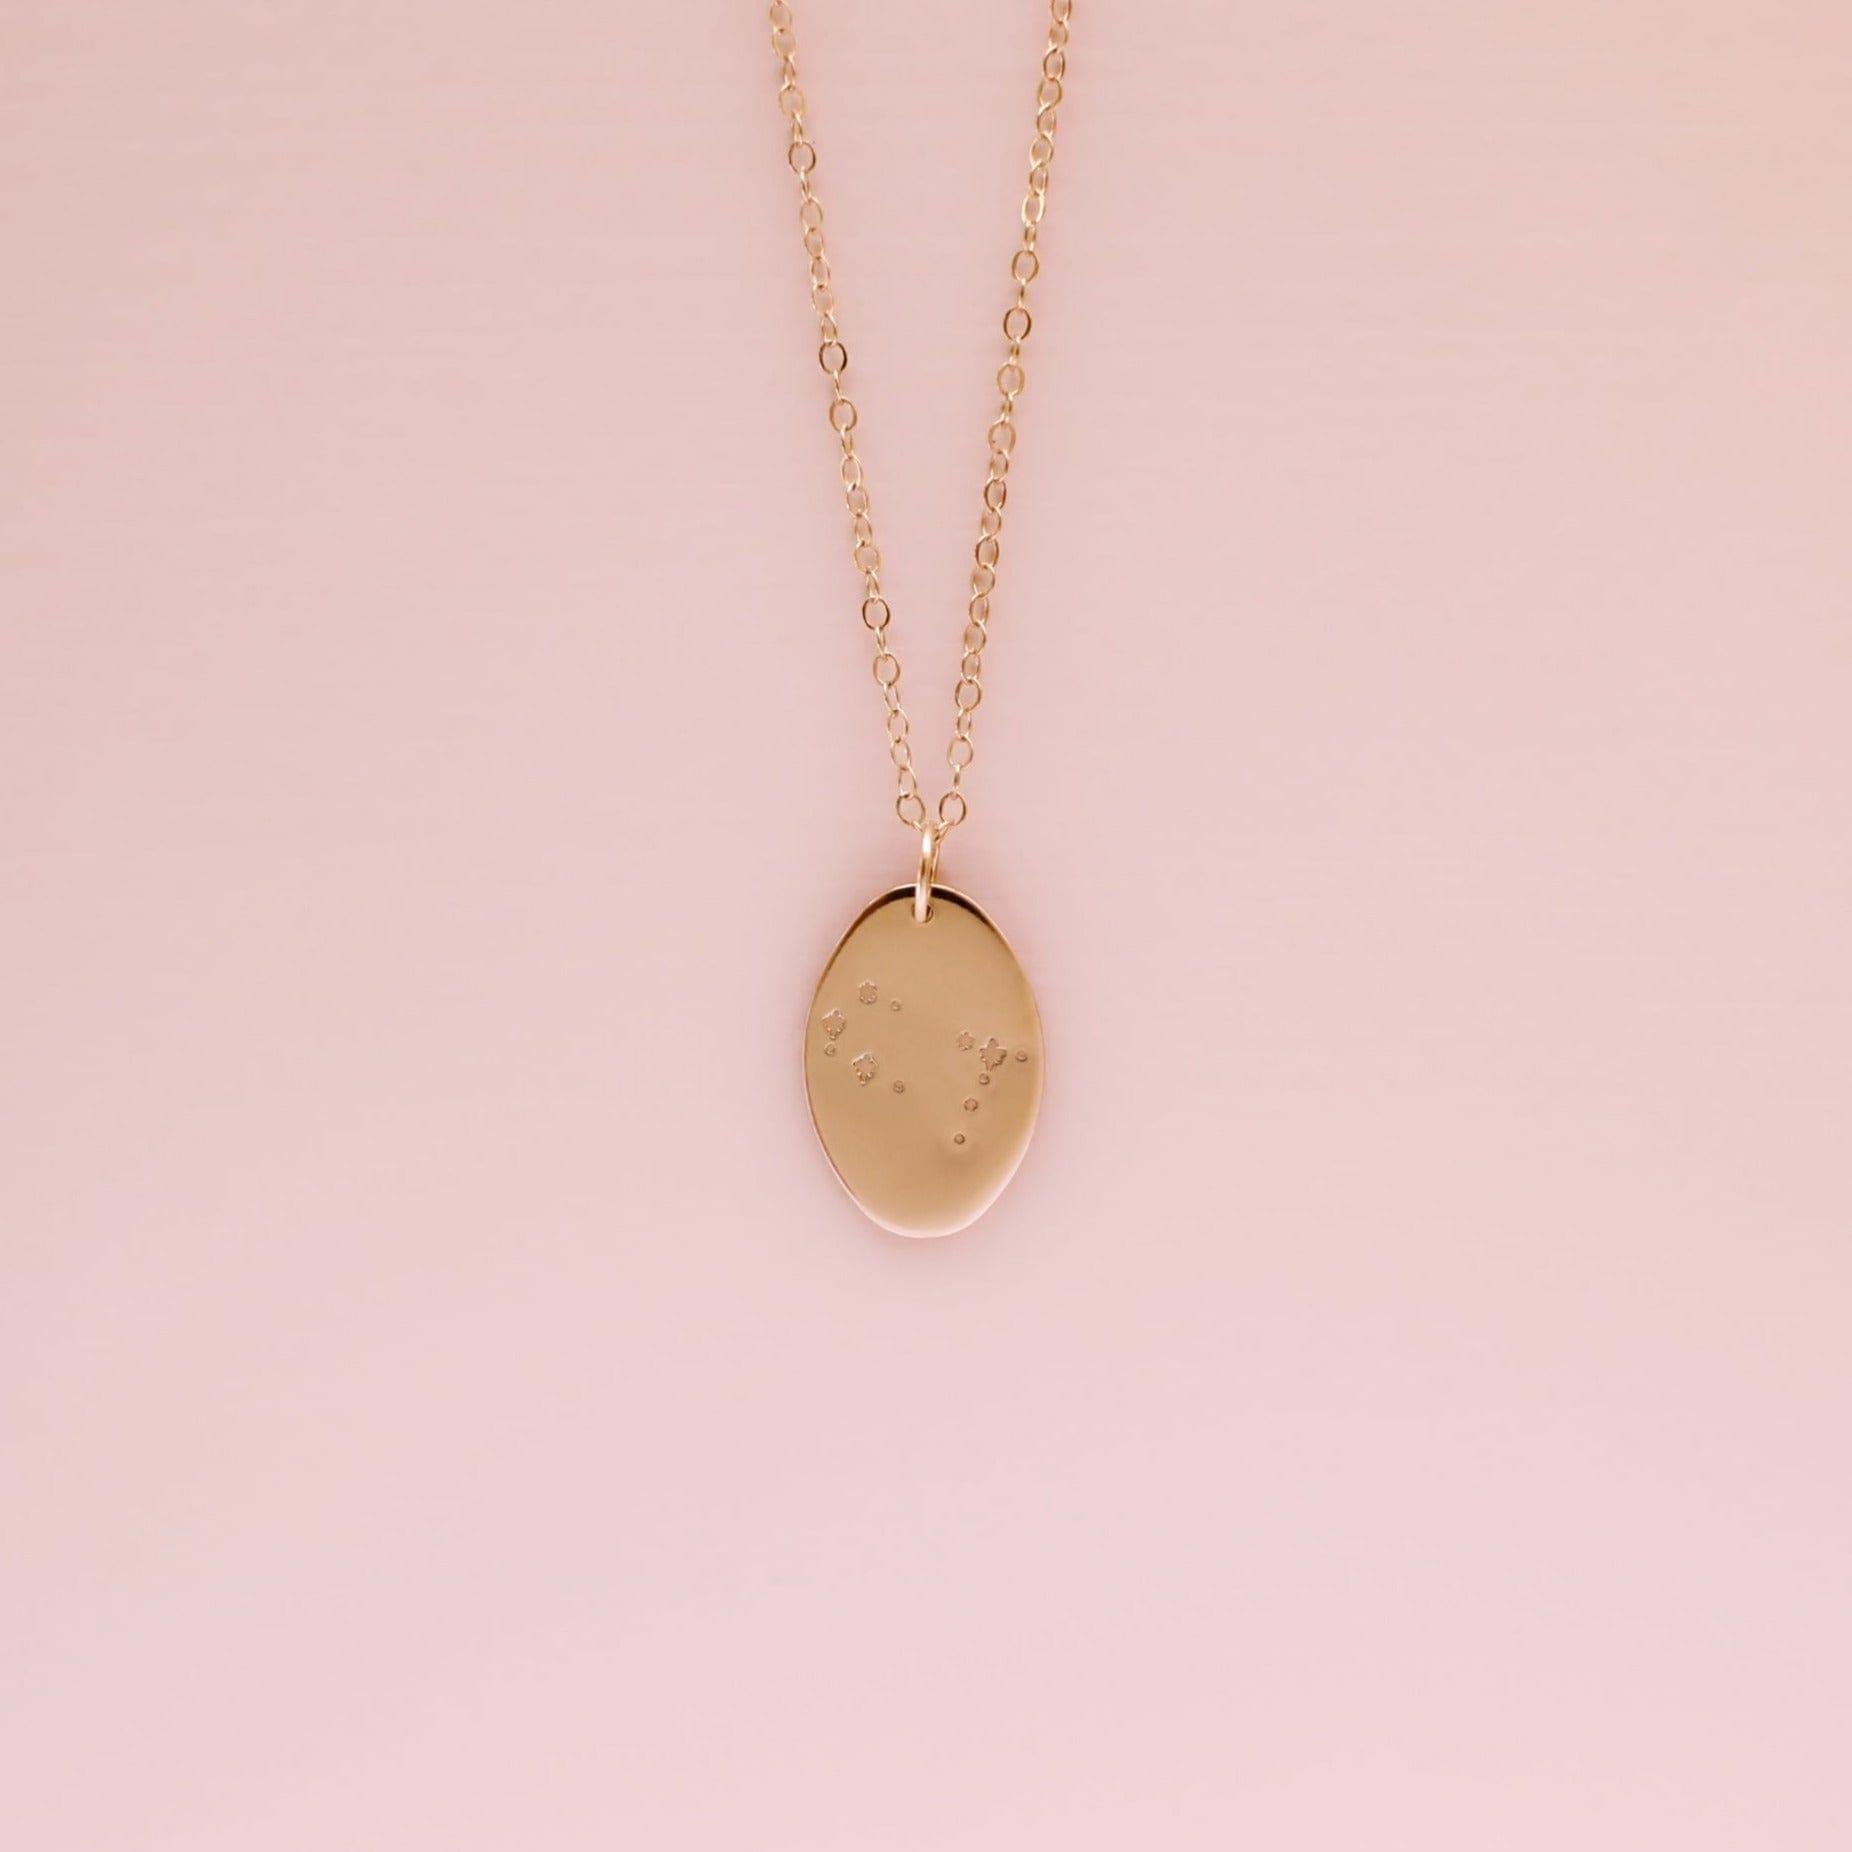 Liv Zodiac Constellation Necklace - Nolia Jewelry - Meaningful + Sustainably Handcrafted Jewelry